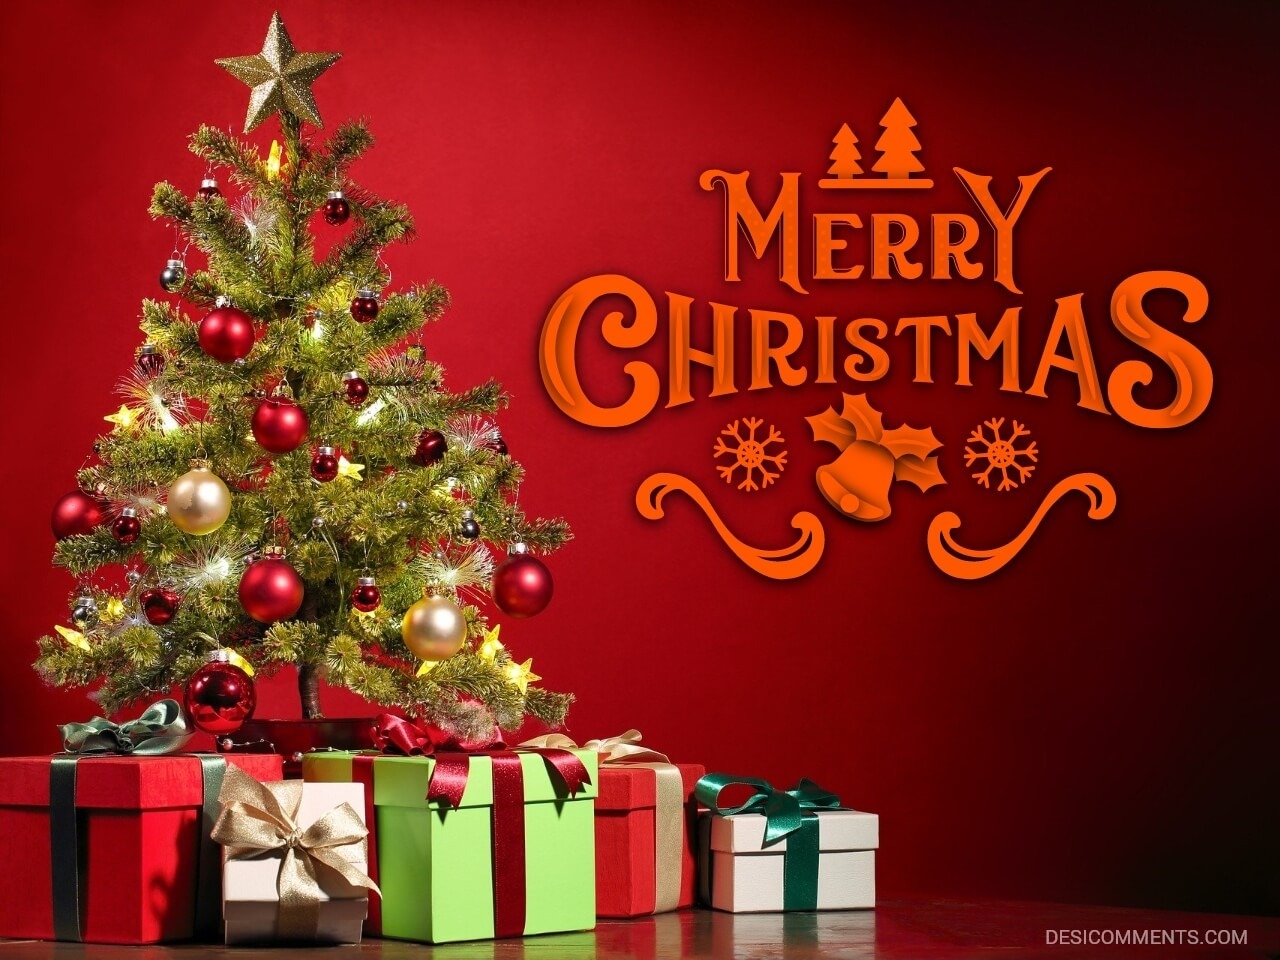 Merry Christmas For You - DesiComments.com